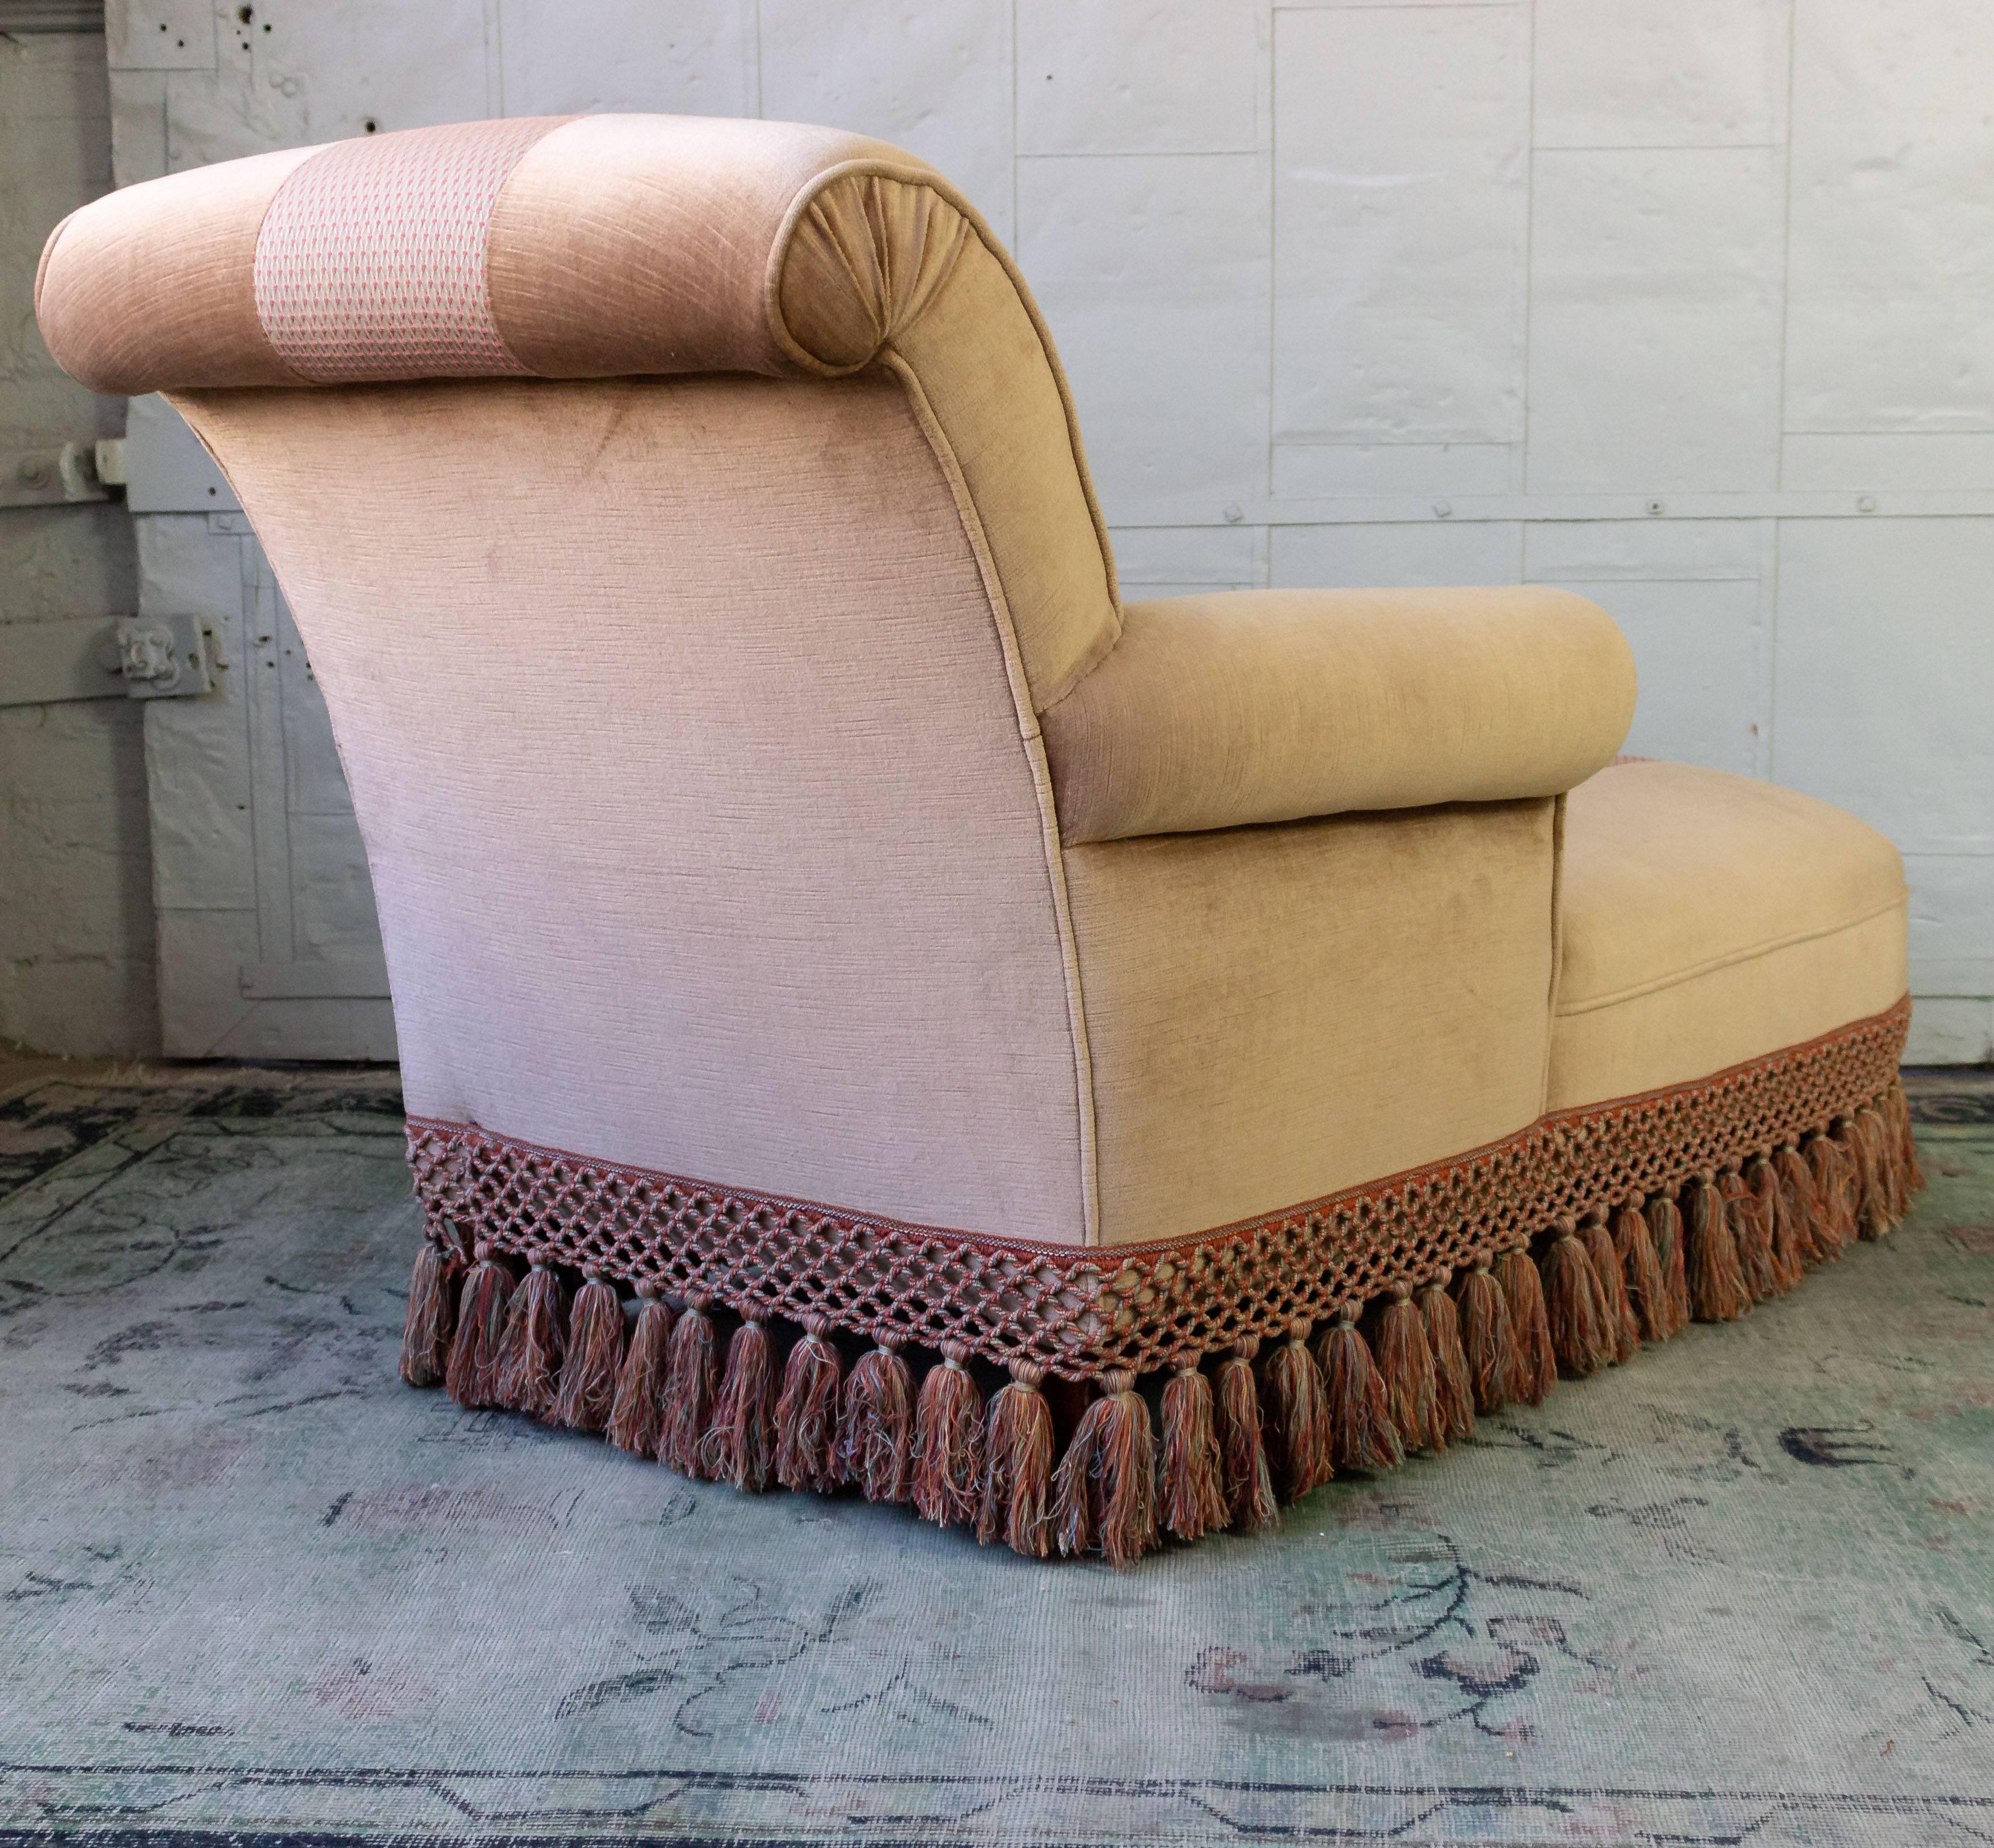 Chaise Longue With Contrasting Fabric and Trim 5